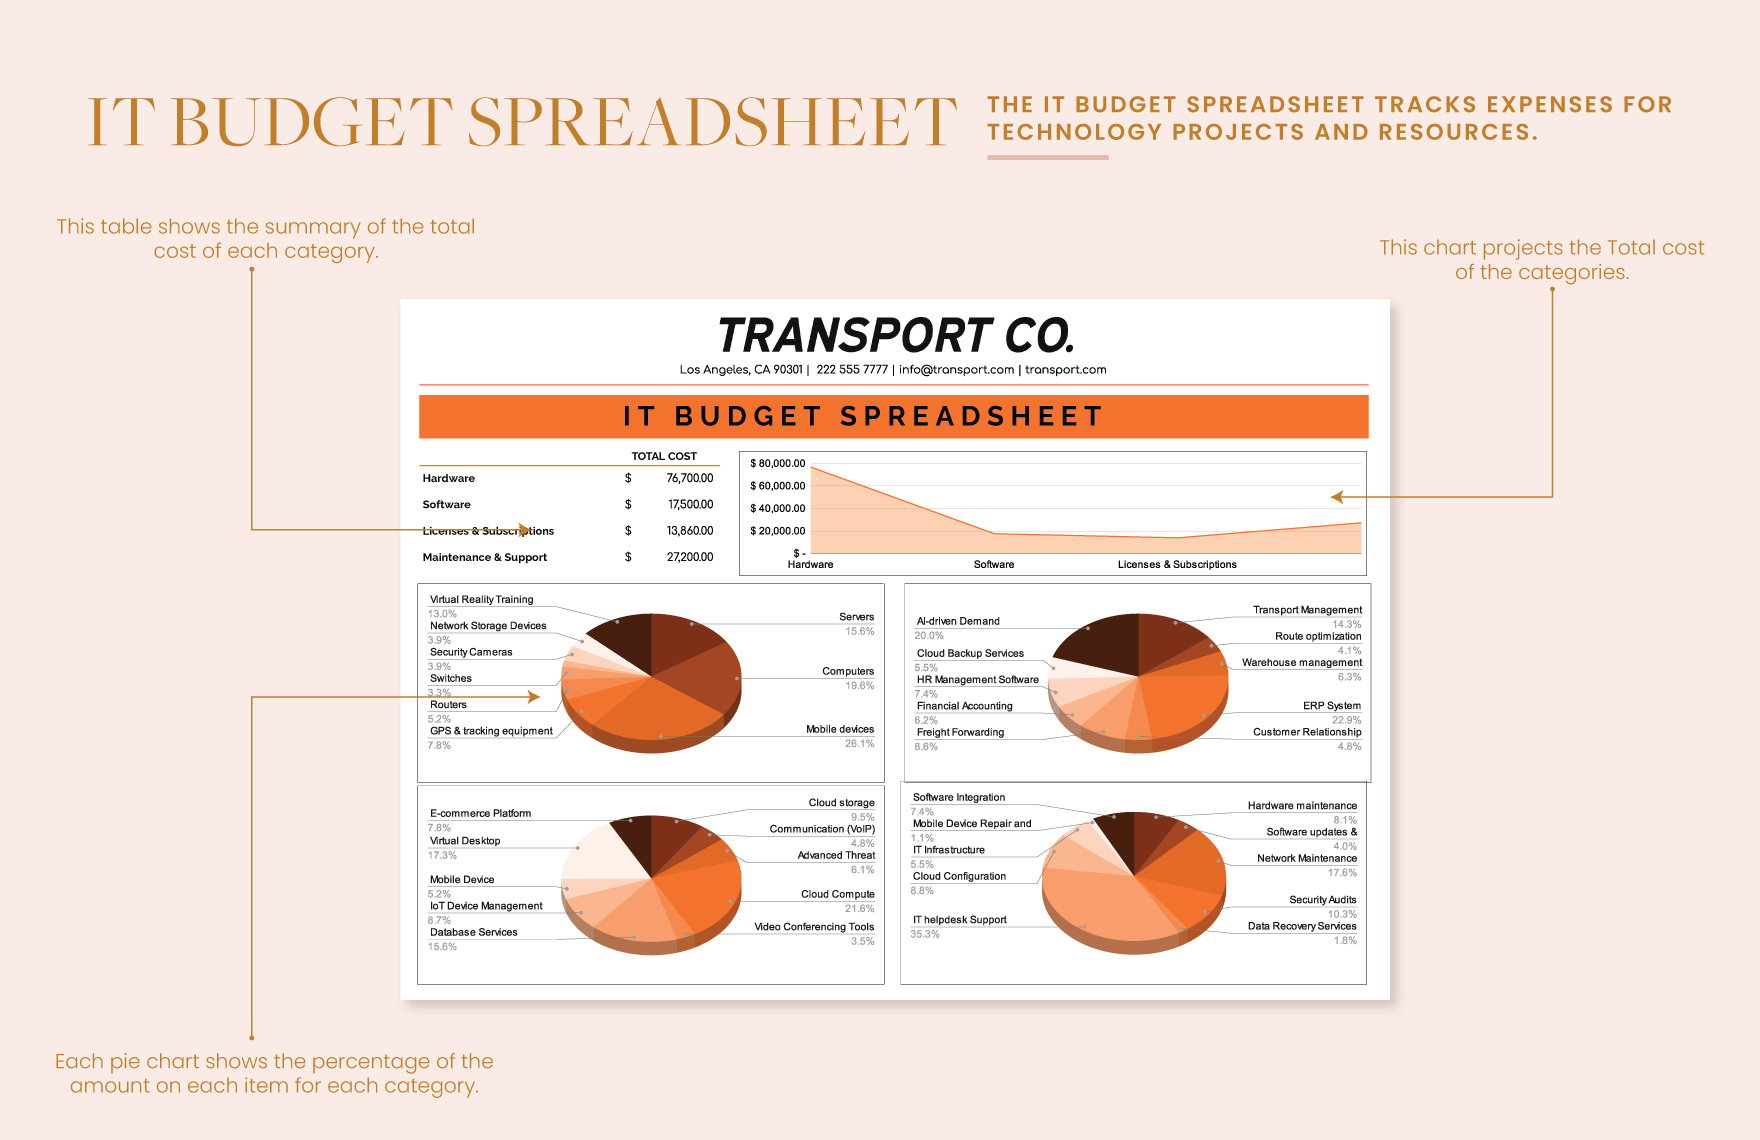 Transport and Logistics IT Budget Spreadsheet Template